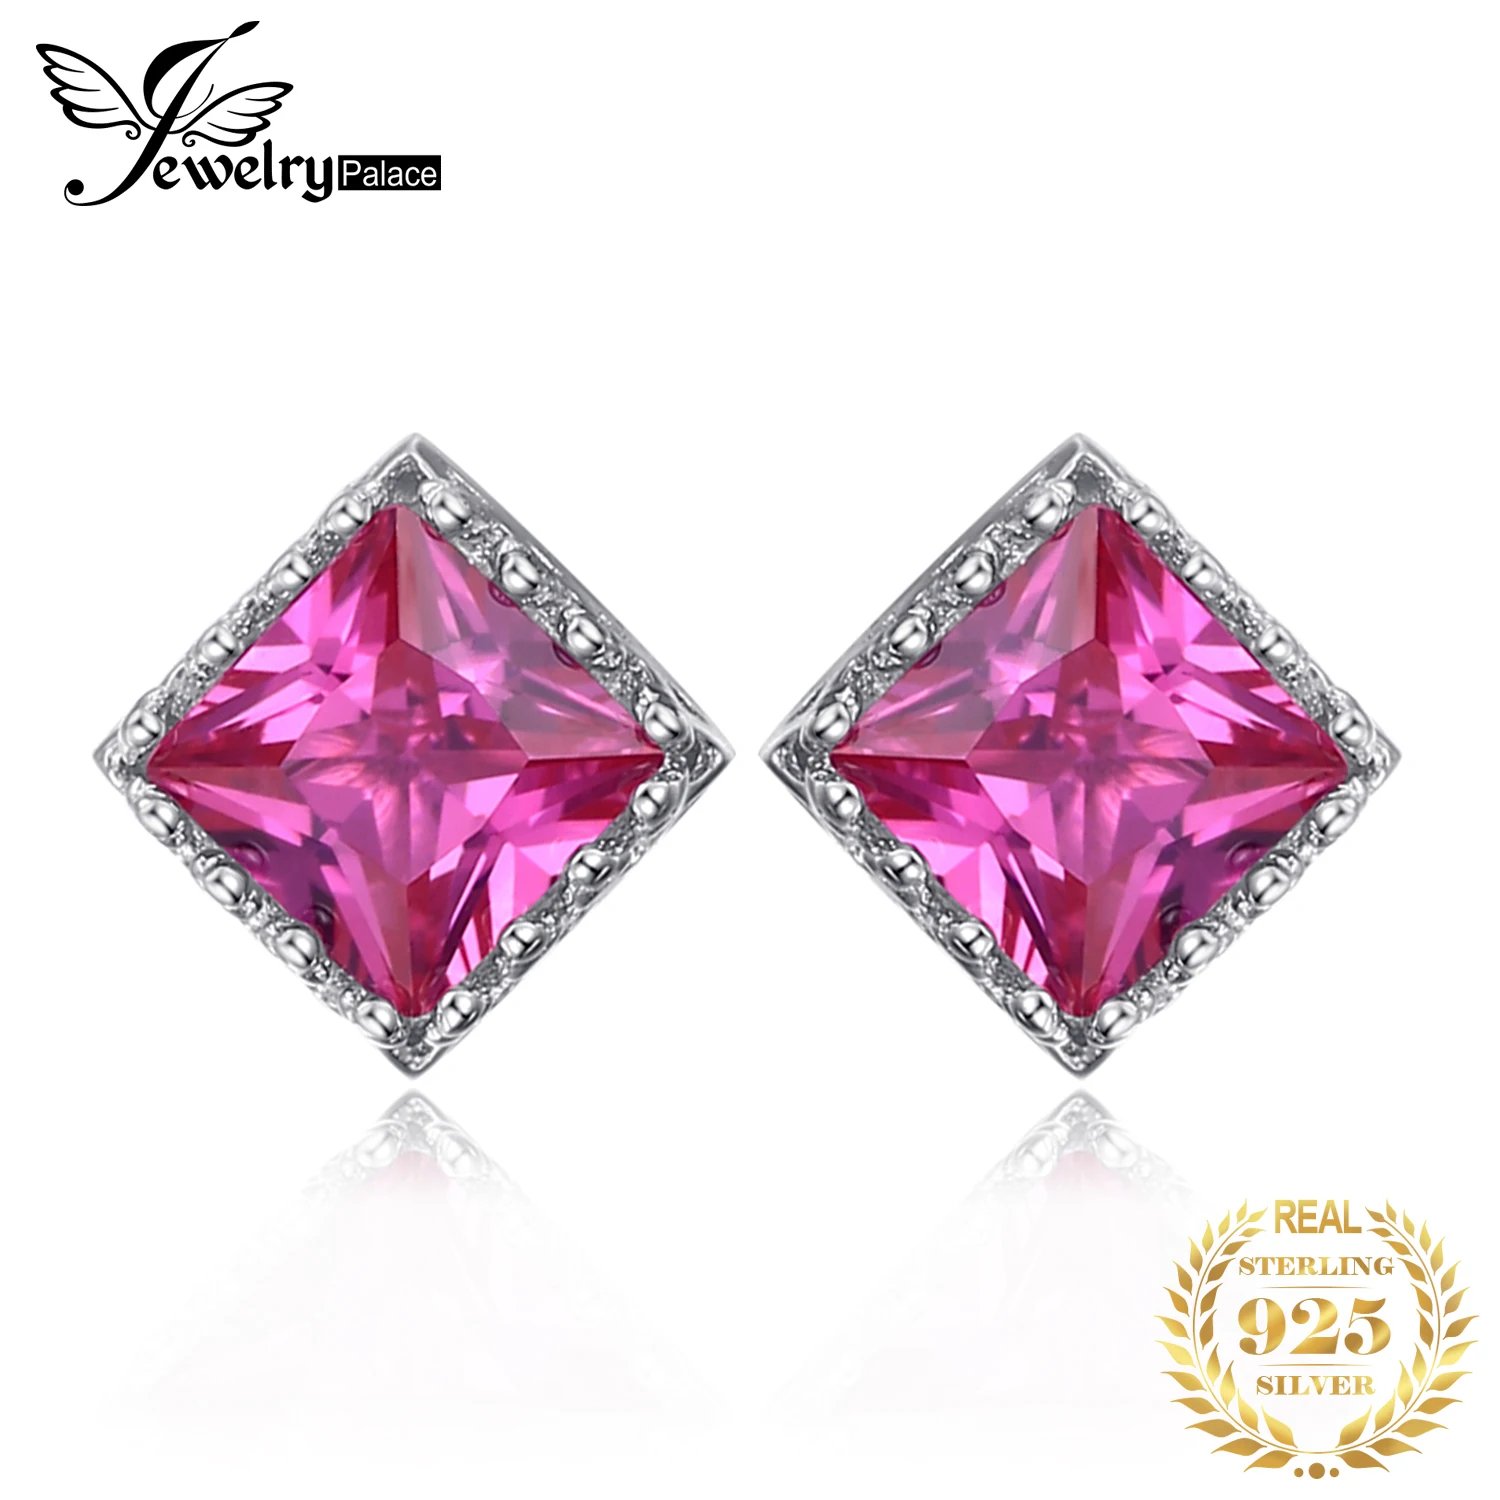 

JewelryPalace Square 1.6ct Created Pink Sapphire 925 Sterling Silver Stud Earrings for Woman Gemstone Fine Jewelry Trendy Gift